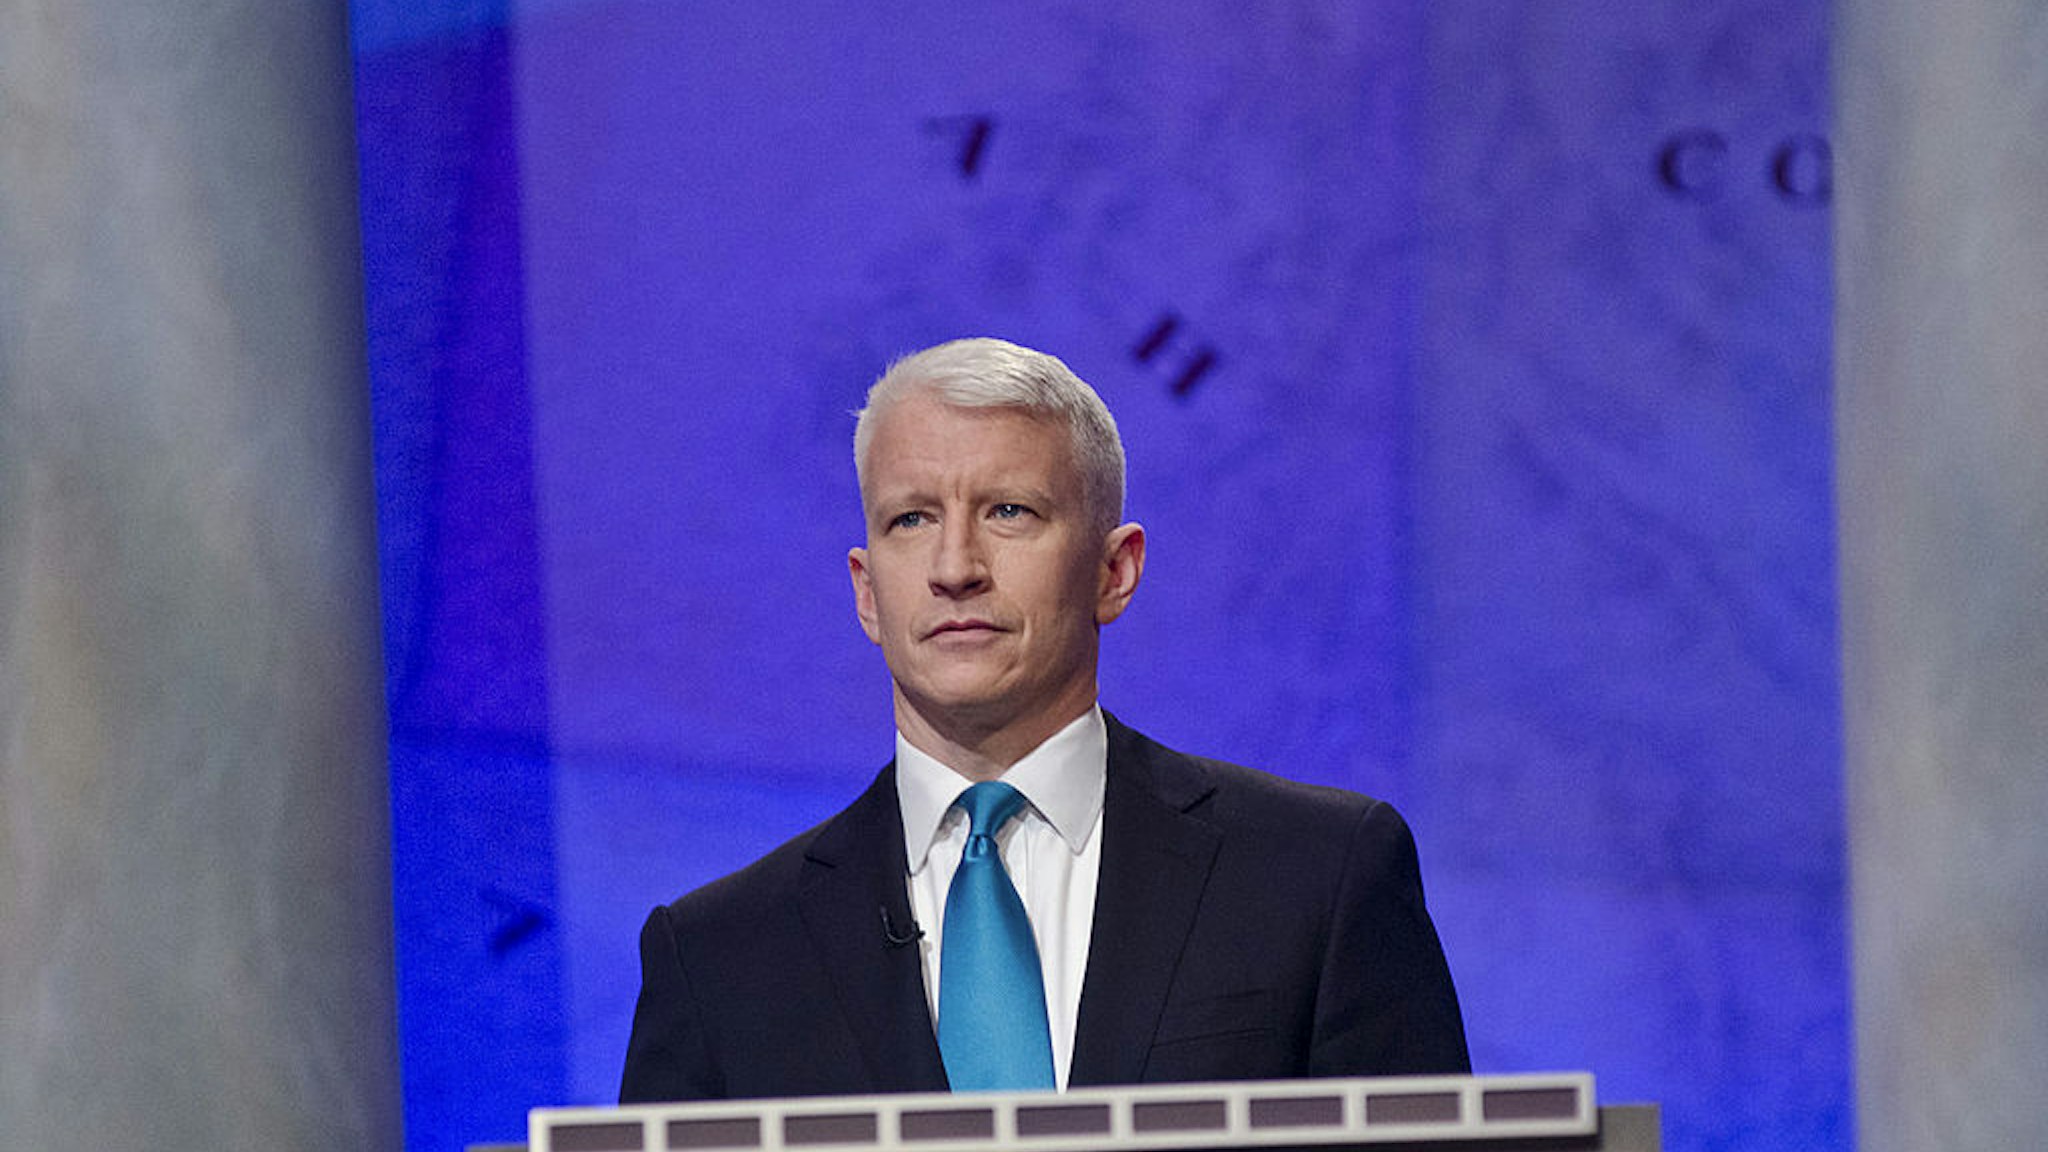 WASHINGTON, DC - APRIL 21: Anderson Cooper speaks during a rehearsal before a taping of Jeopardy! Power Players Week at DAR Constitution Hall on April 21, 2012 in Washington, DC. (Photo by Kris Connor/Getty Images)